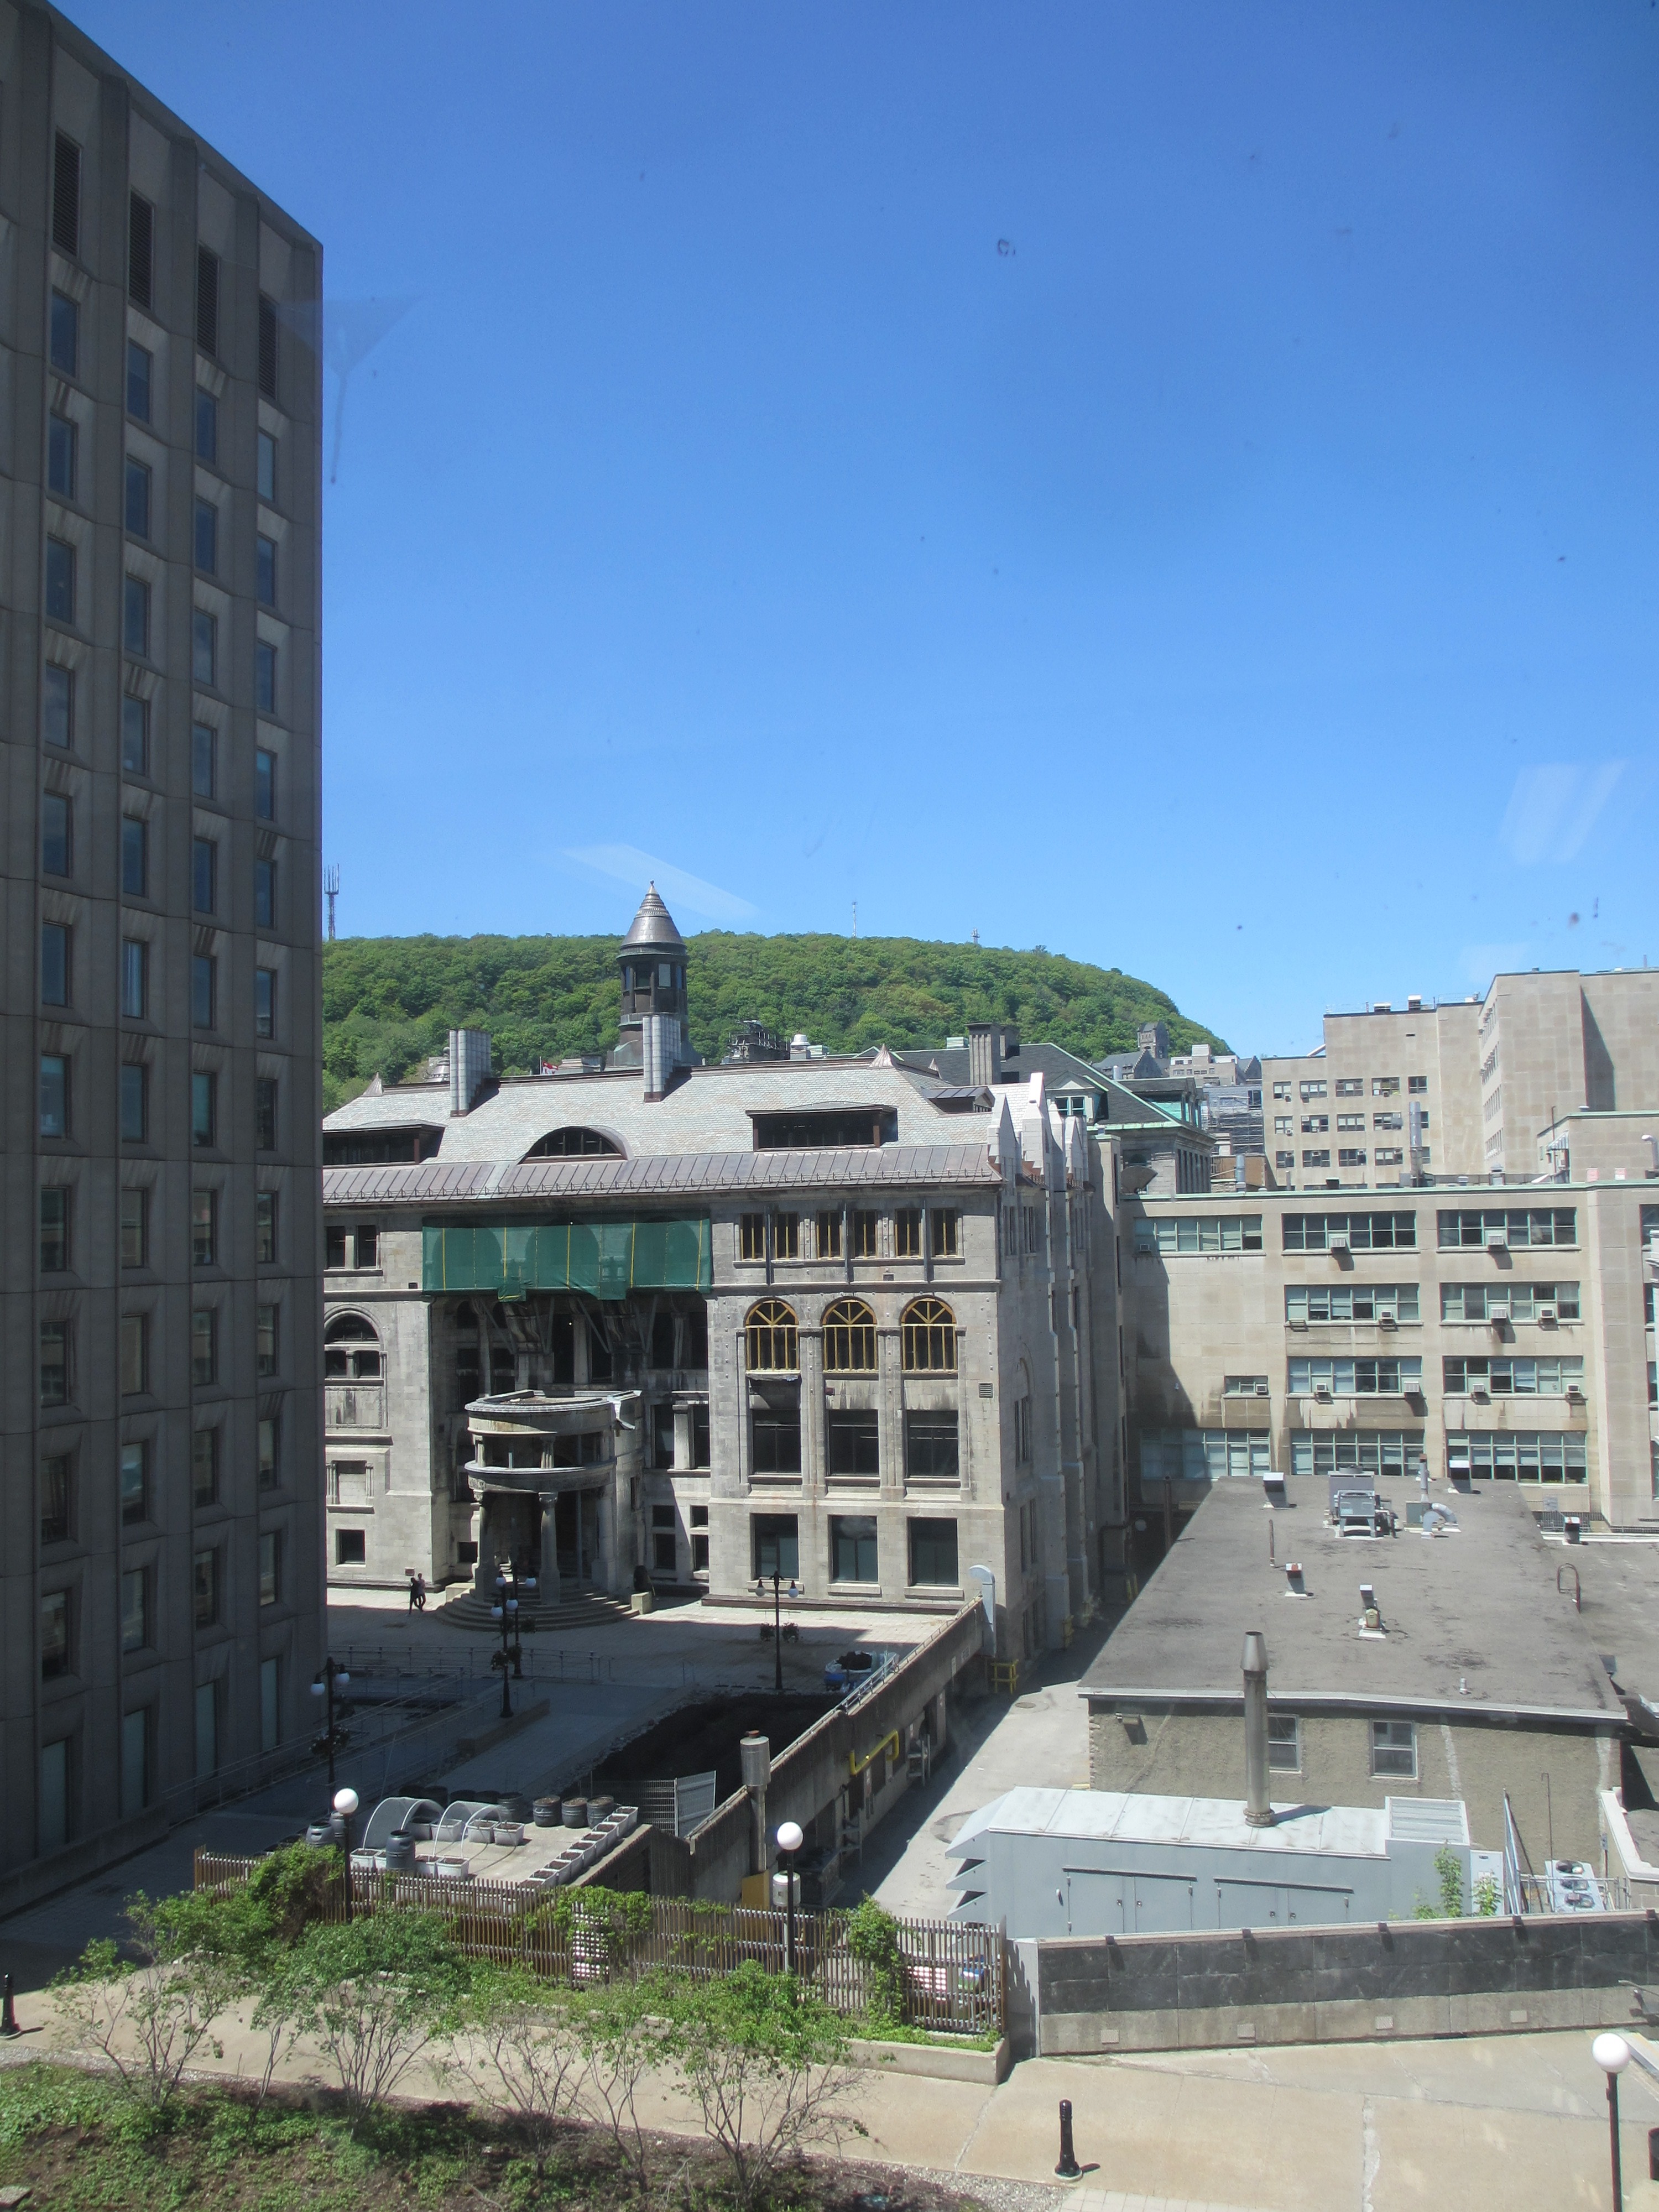 Discussion and Seminar at the McGill University